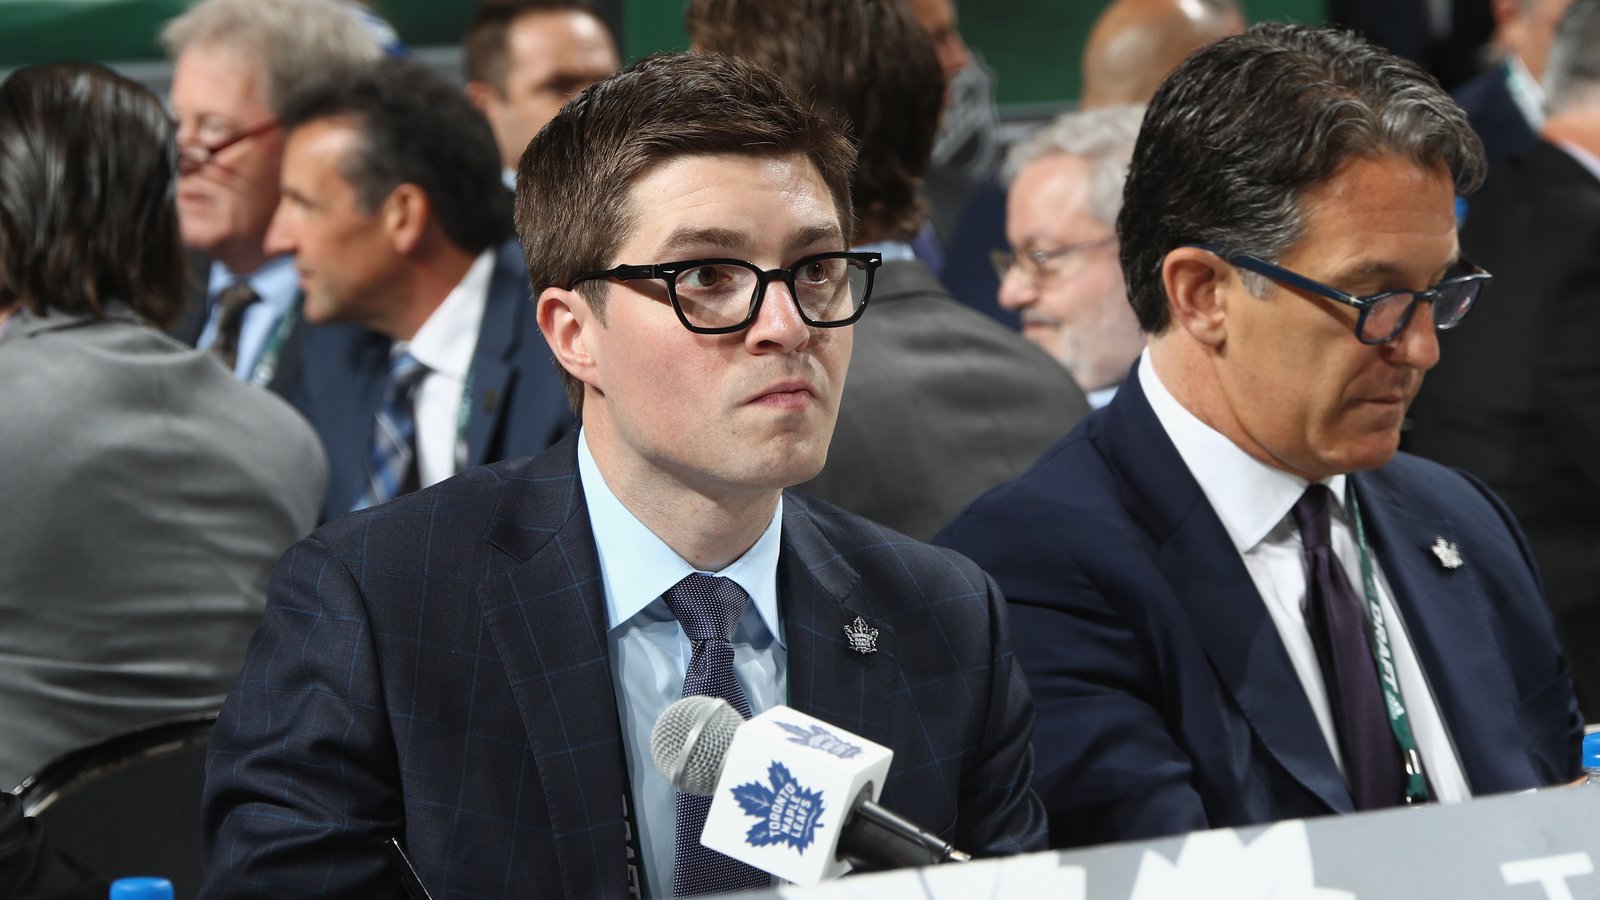 Leafs putting trade package together to acquire another forward 